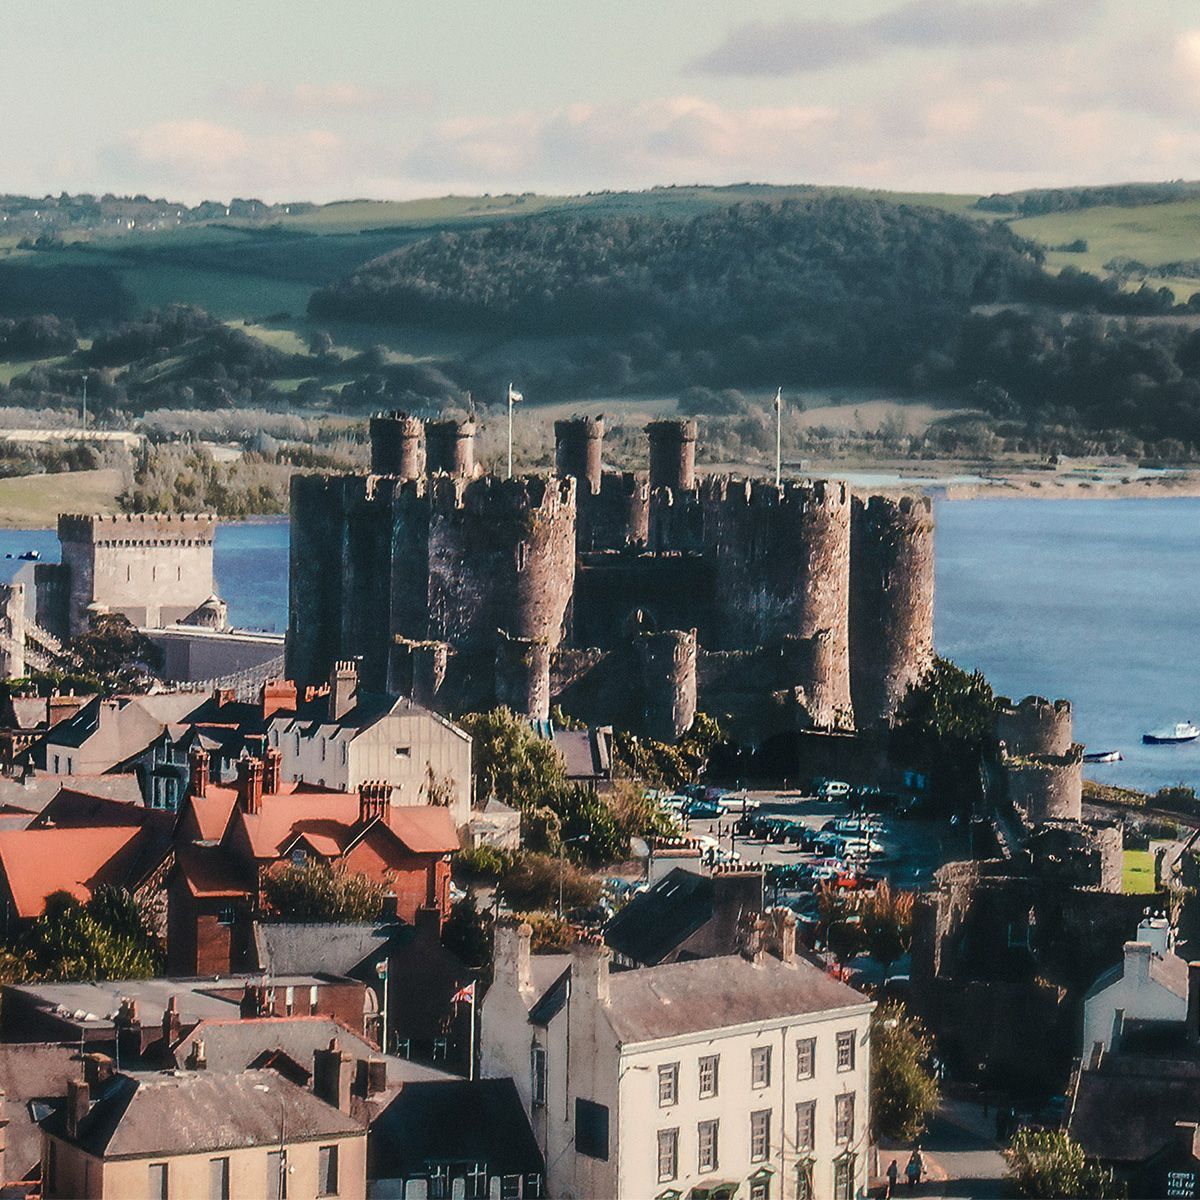 The town of Conwy is overlooked by Conwy Castle and surrounded by ancient castle walls. 📍Conwy Castle 📷 Mitch Hodge #WalesCoastPath #LlwybrArfordirCymru #CroesoCymru #VisitWales #LoveWales #CaruCymru #Wales #Cymru #Castle #CastlesofWales #CoastalWalk #CoastalWalks